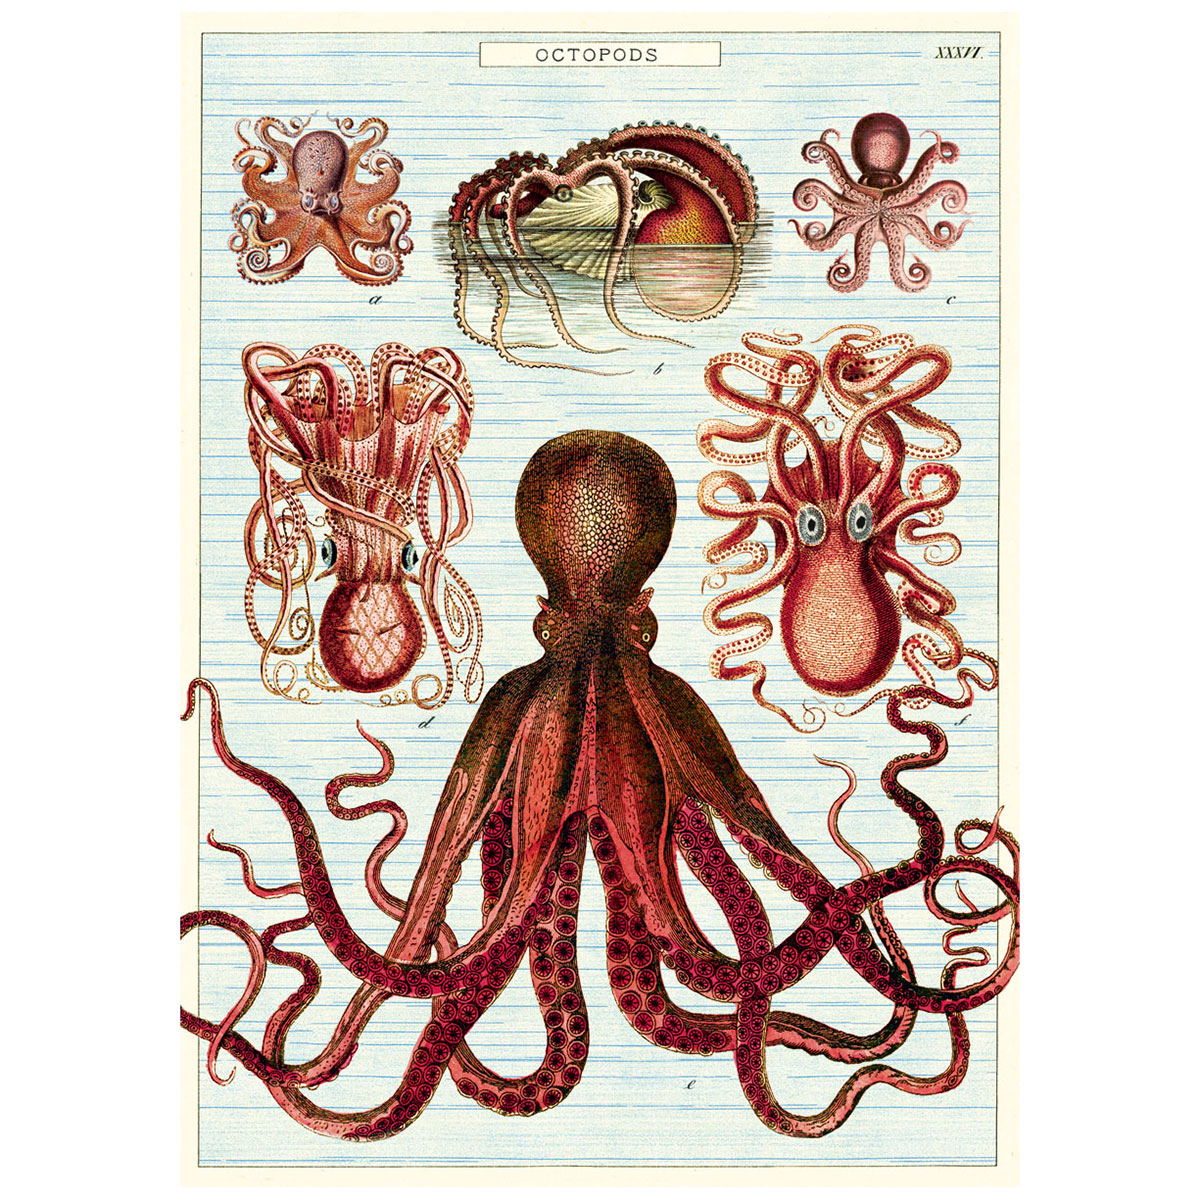 octopus anatomy for kids